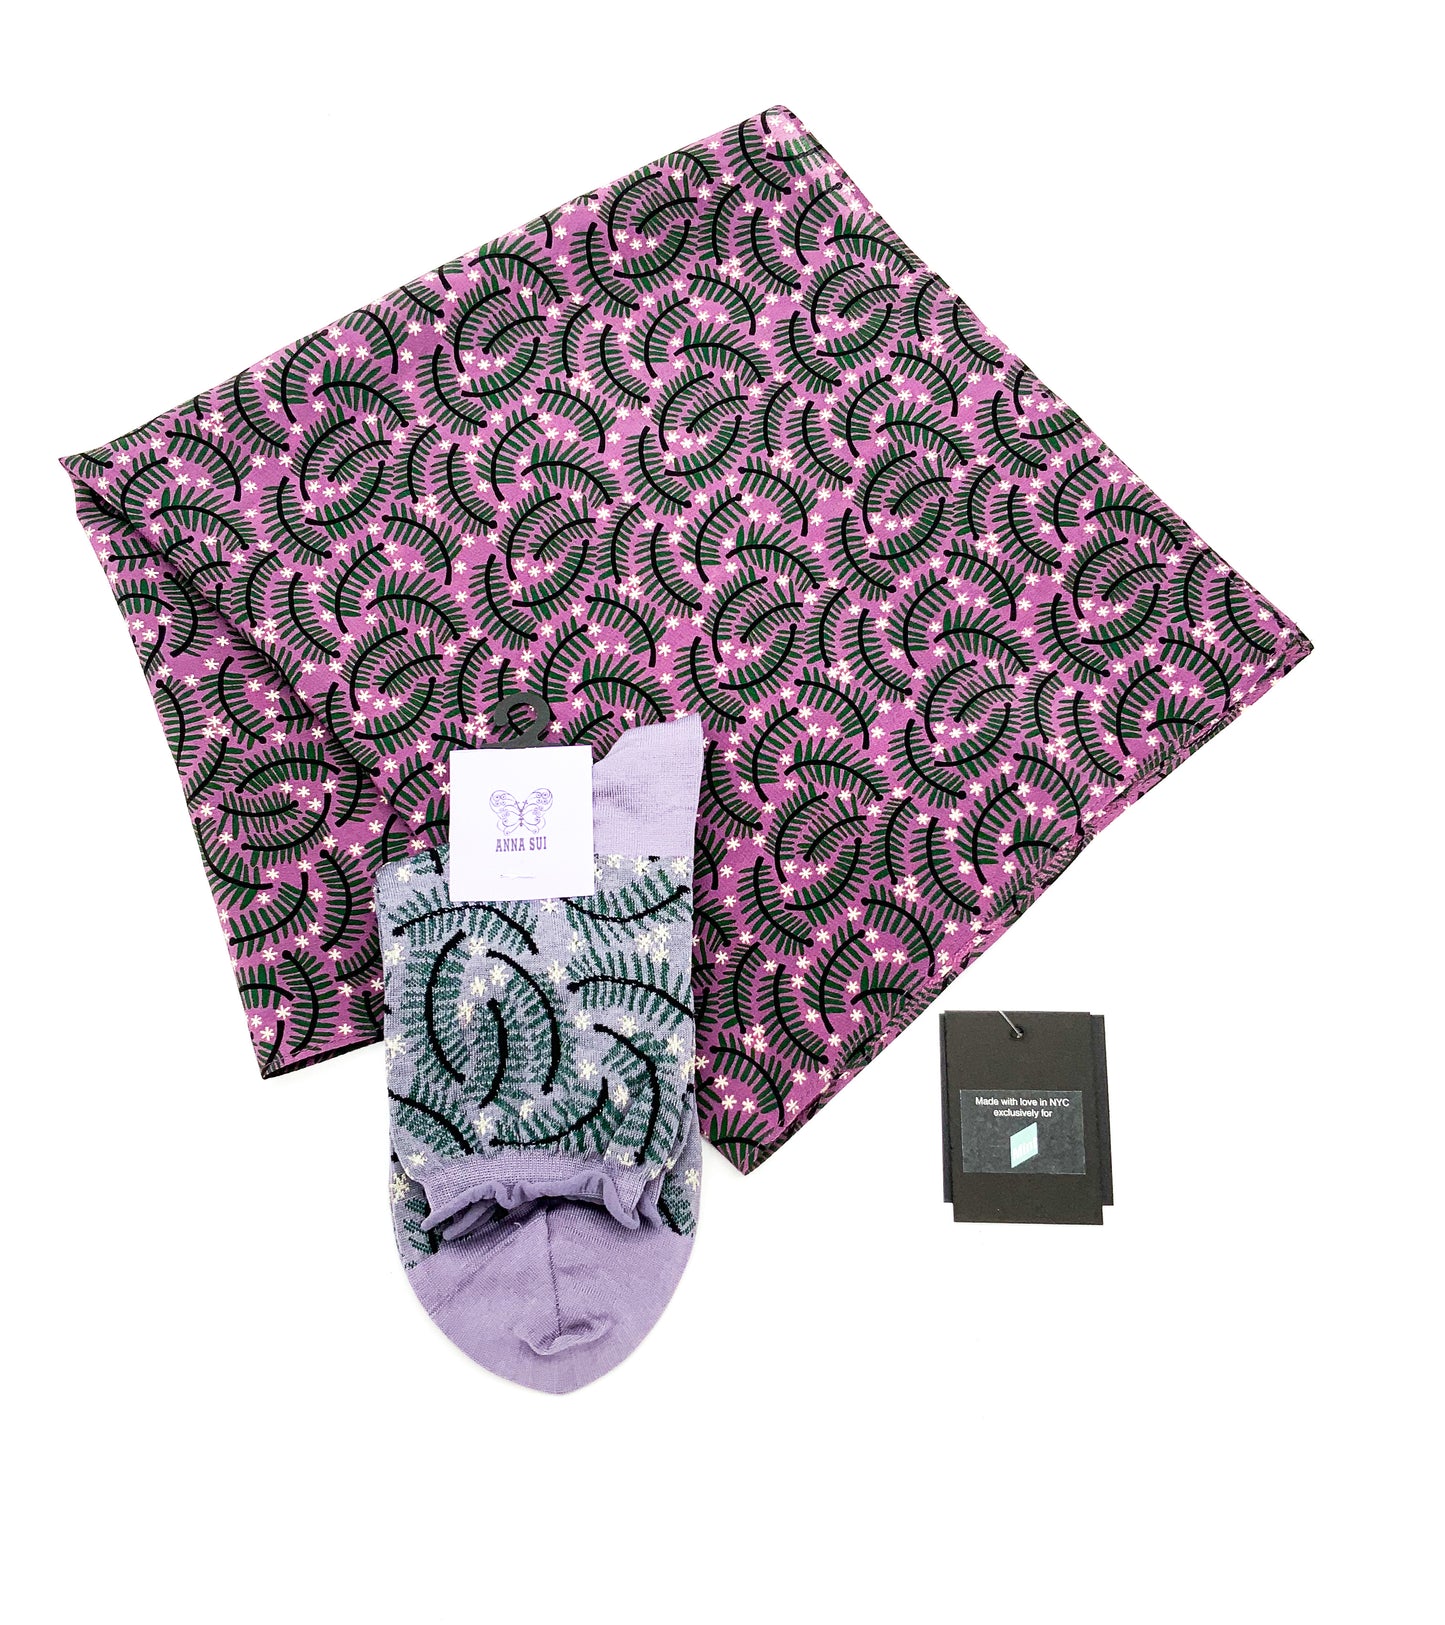 Anna Sui Lilac Tumbling Pines Scarf